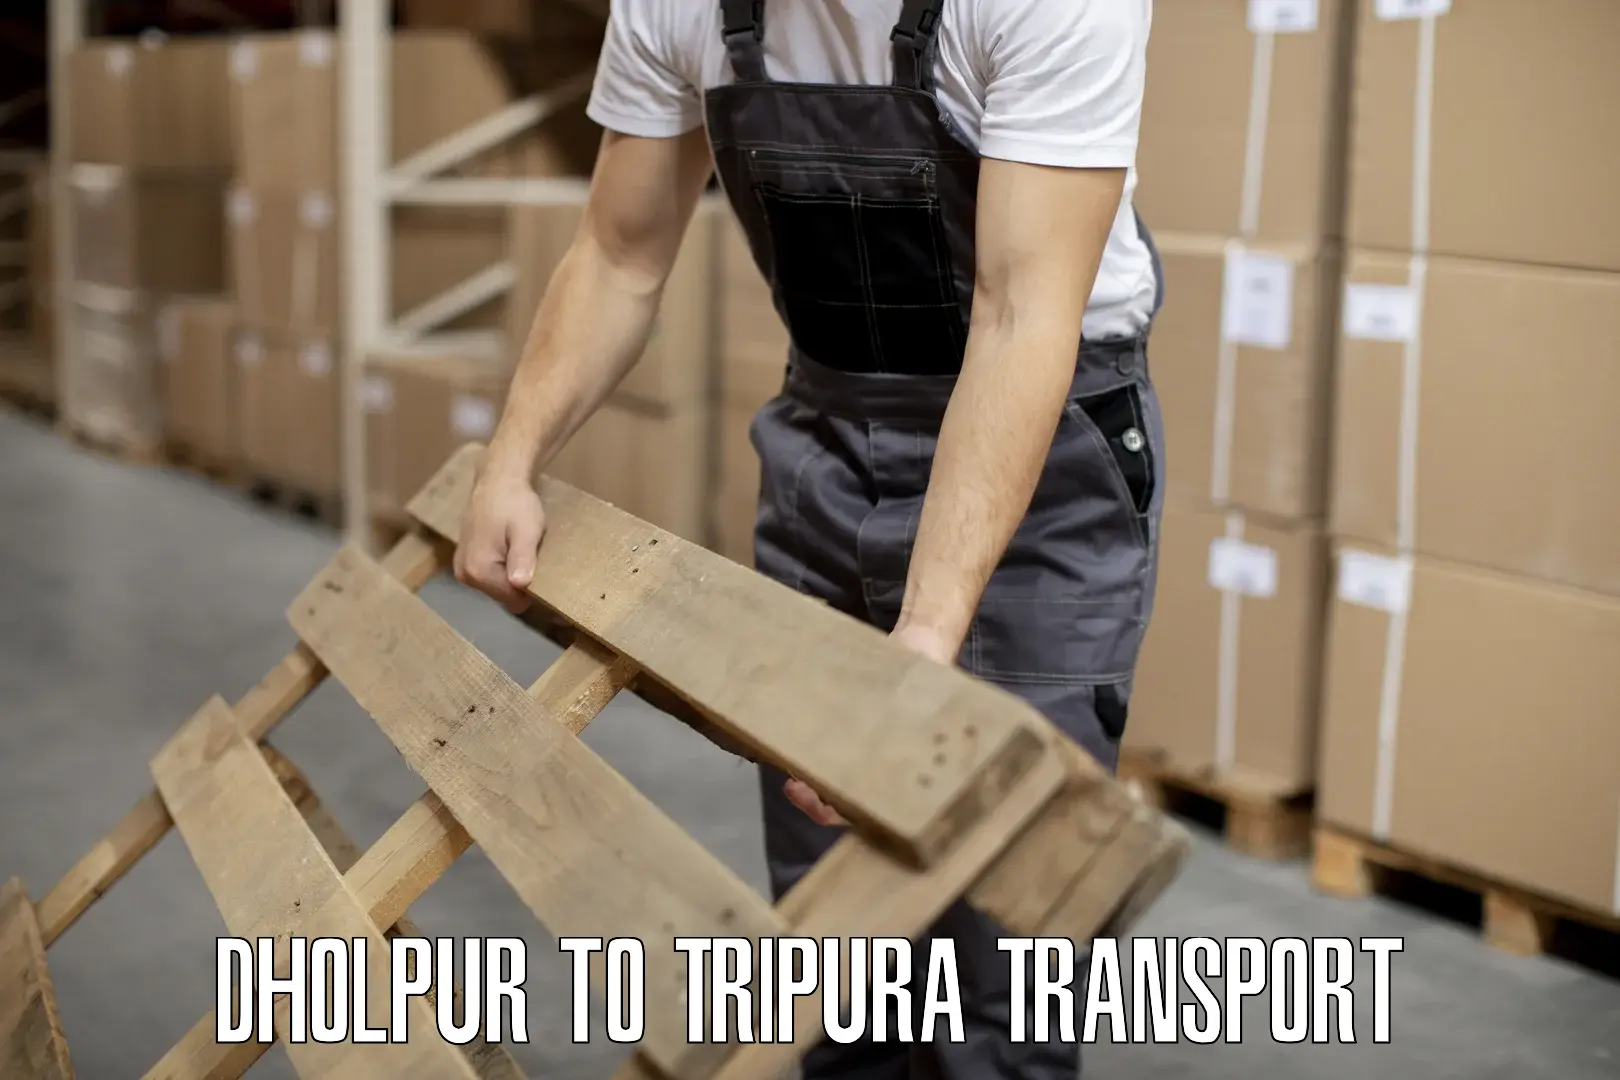 Transport services in Dholpur to Udaipur Tripura